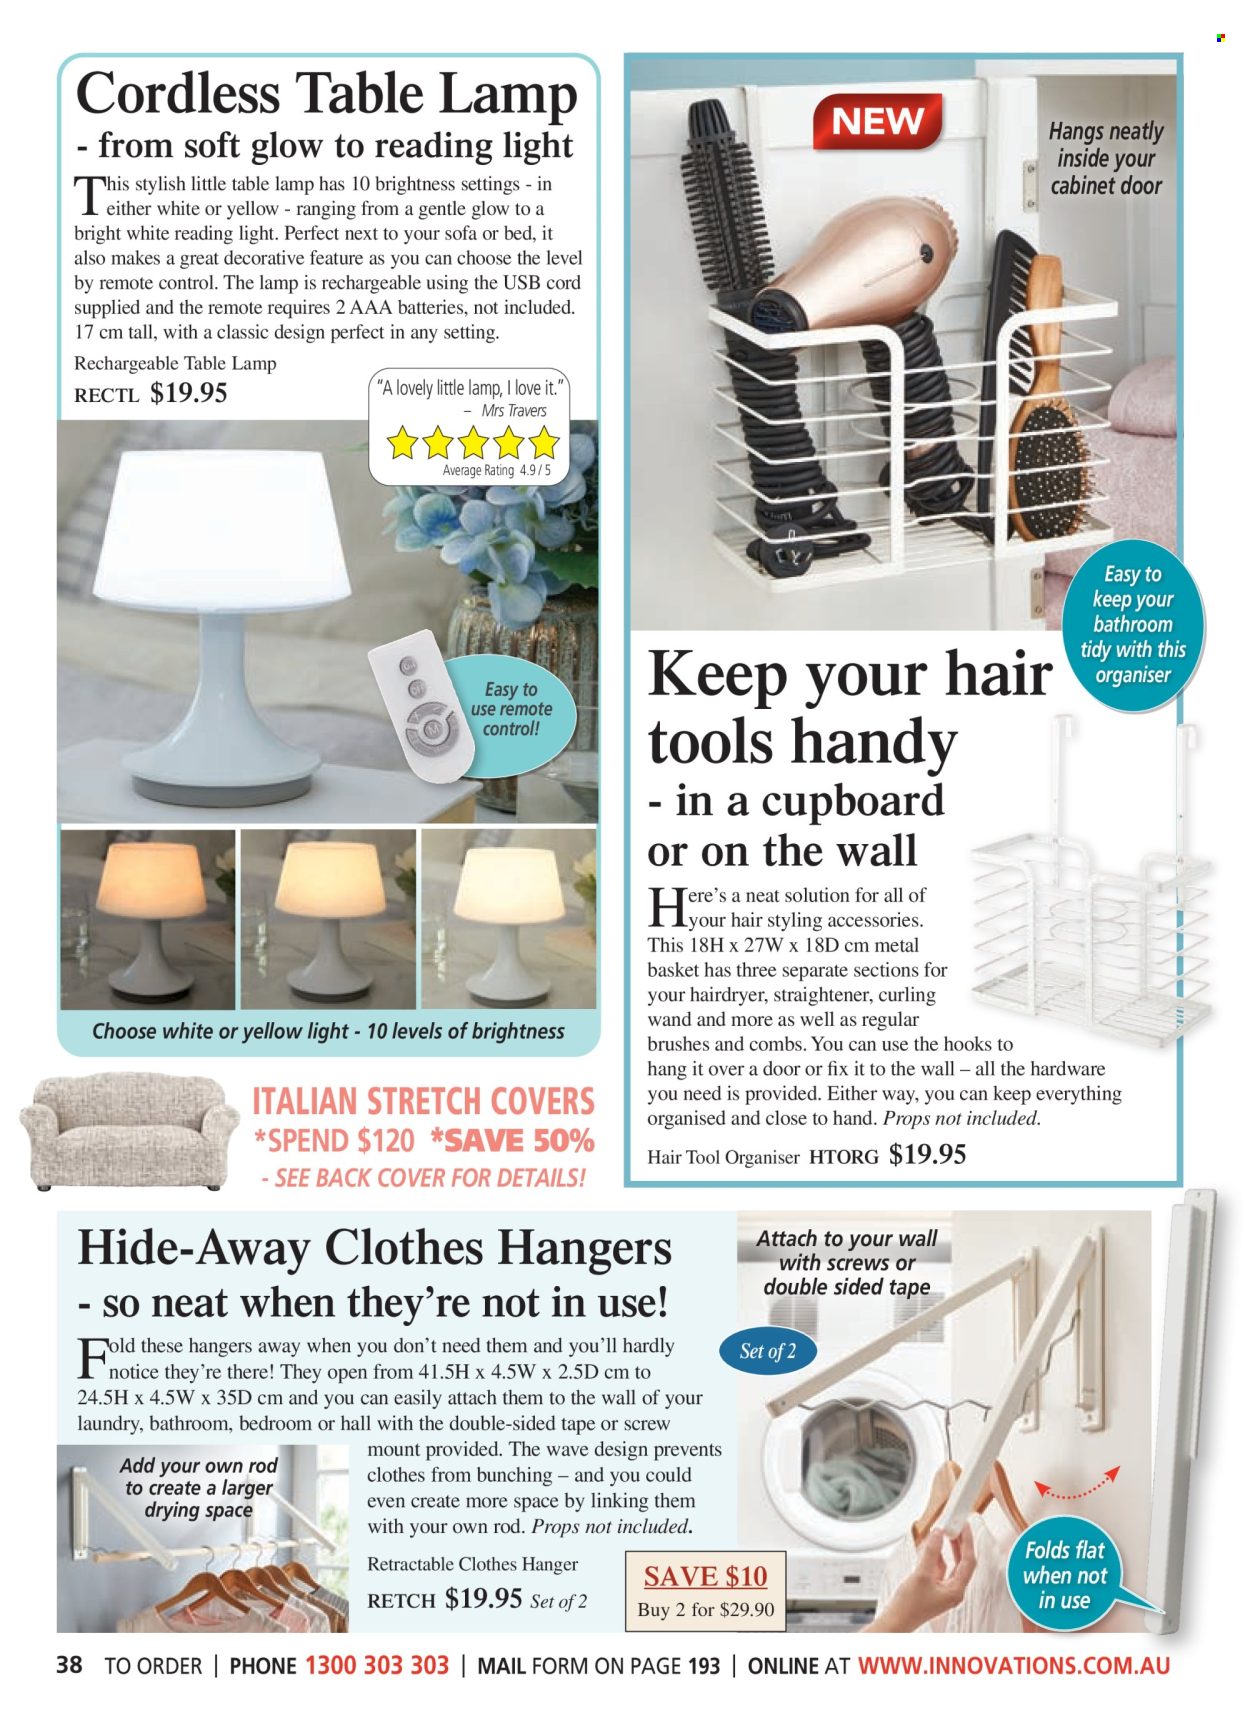 thumbnail - Innovations Catalogue - Sales products - basket, hook, hanger, book light, battery, AAA batteries, remote control, hair dryer, straightener, hair accessories, lamp, table lamp. Page 38.